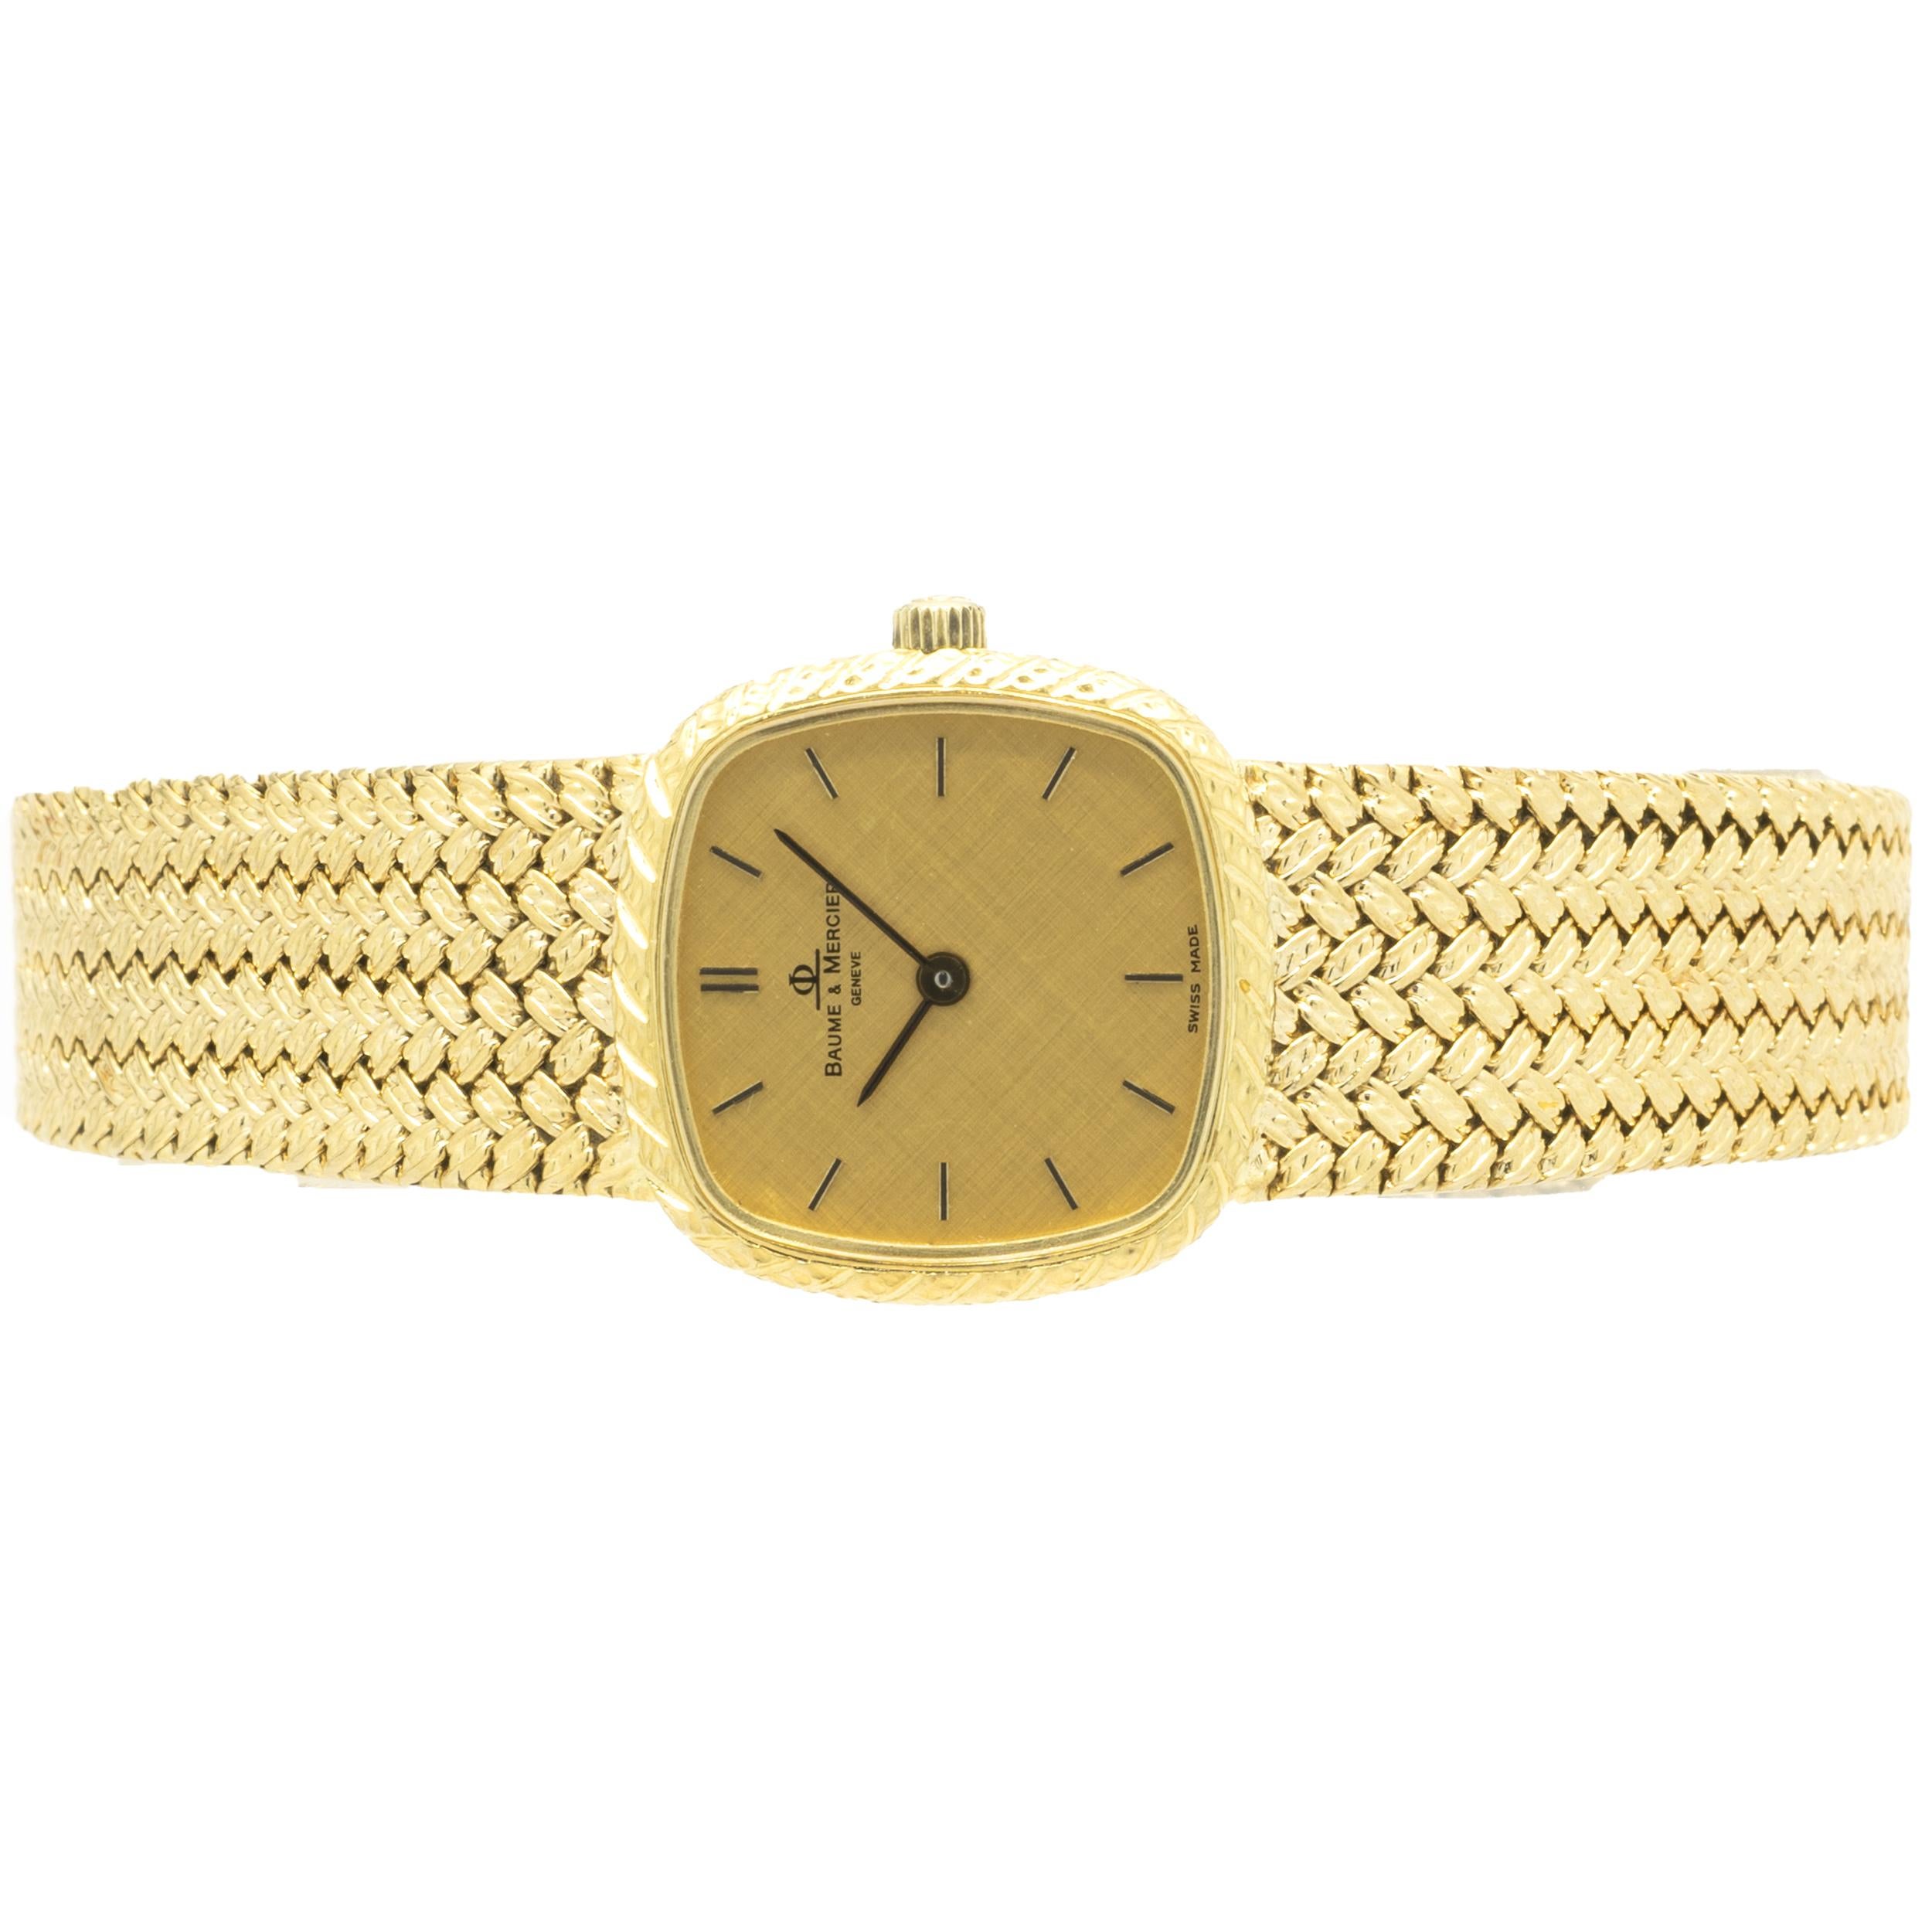 Movement: quartz
Function: hours, minutes
Case: 20.5mm 18K yellow gold cushion case
Band: 18K yellow gold mesh style bracelet 
Dial: champagne etched stick dial
Serial # 1880XXX
Reference # vintage ladies


No box or papers
Guaranteed to be